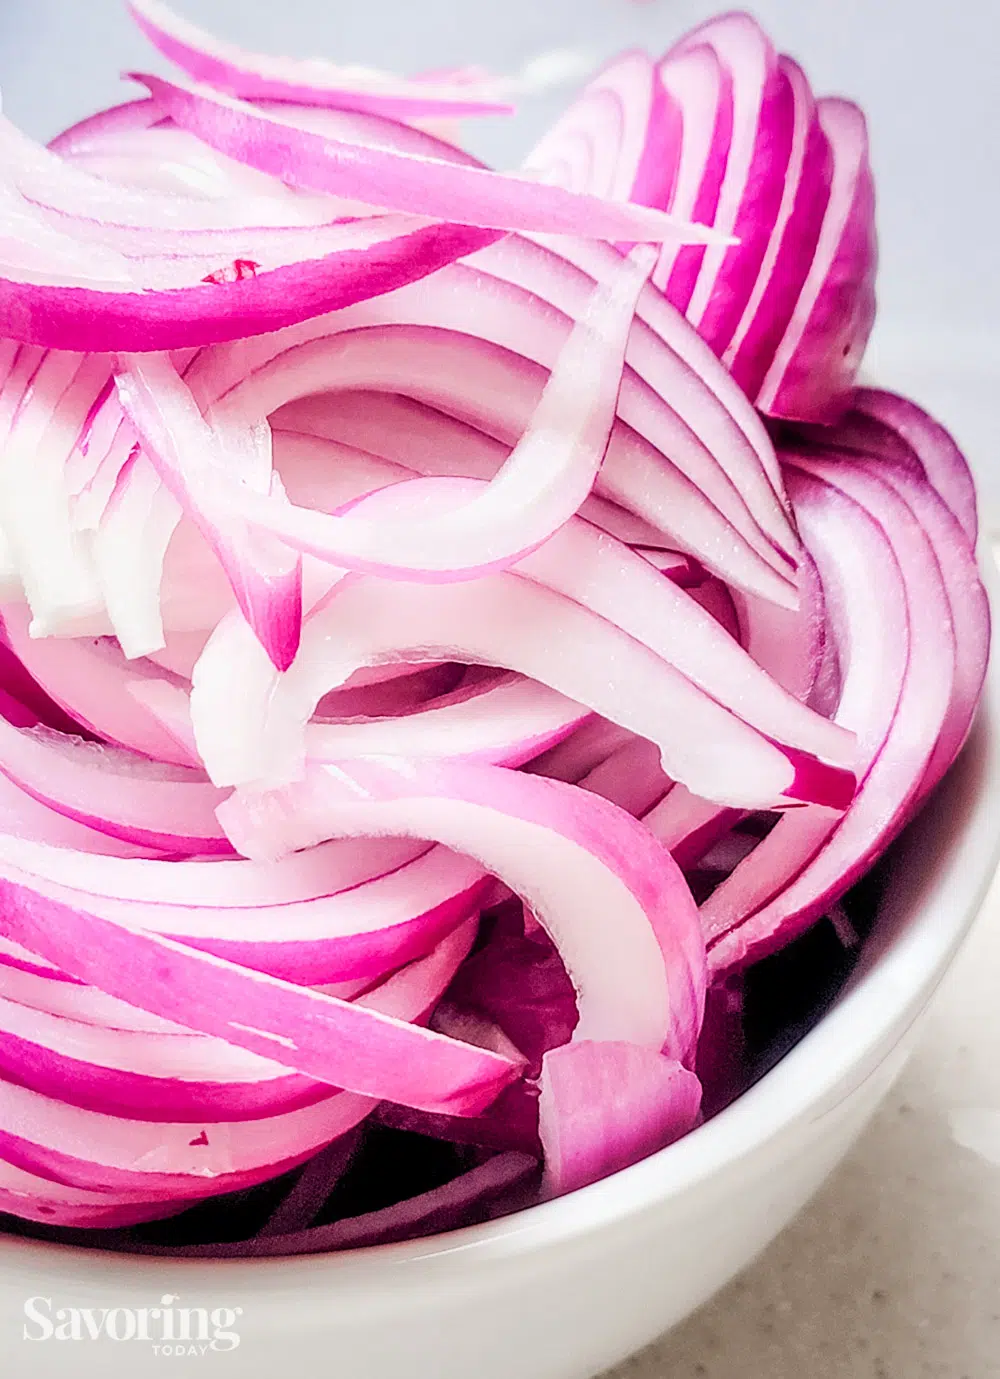 sliced red onions for pickling